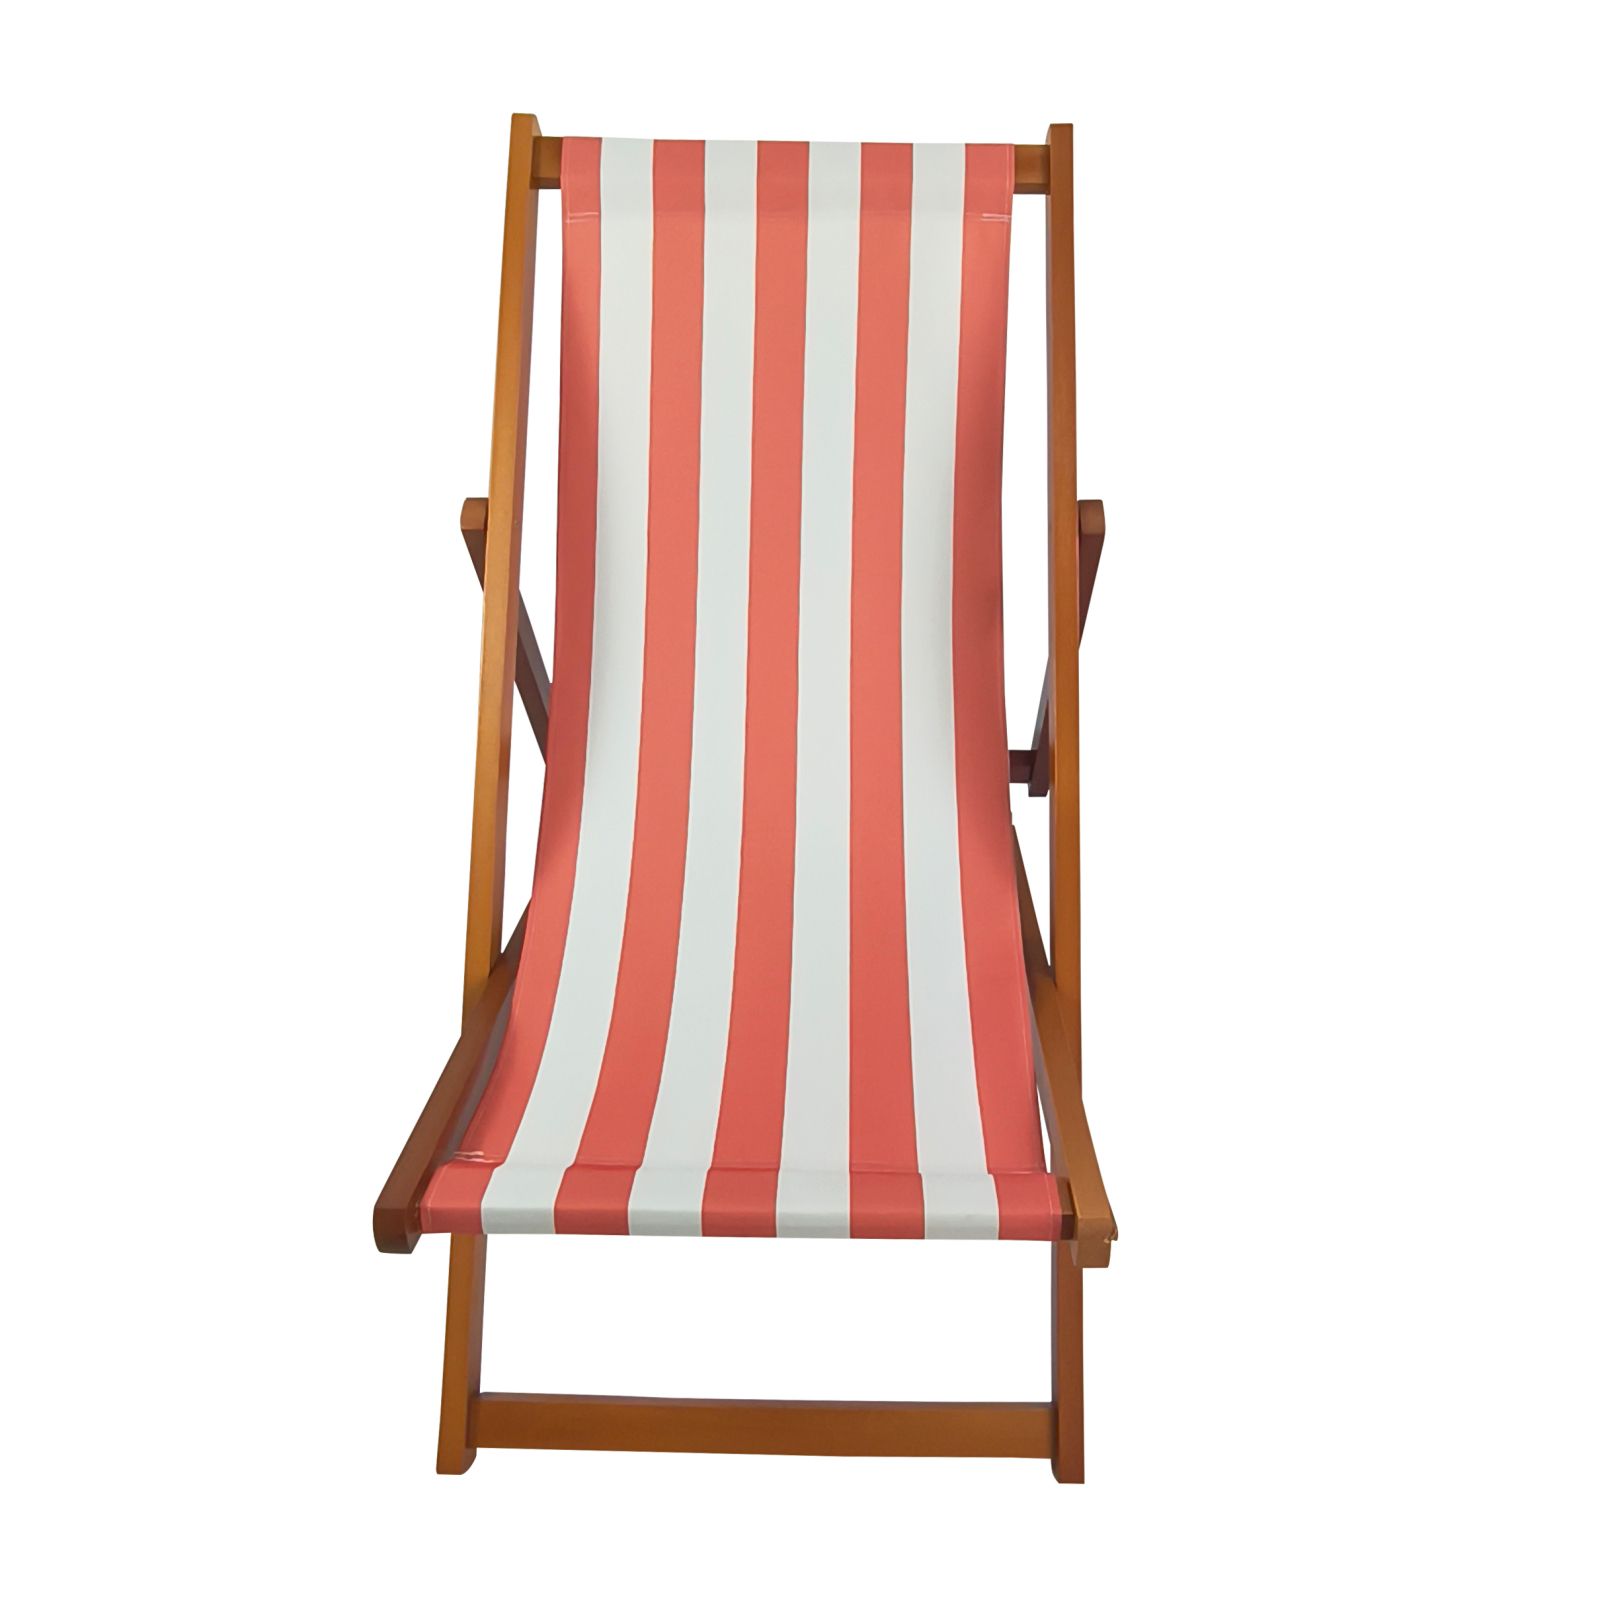 Pouseayar Foldable Sling Chair,Outdoor Beach Chair Chaise Lounge, Orang - image 2 of 7